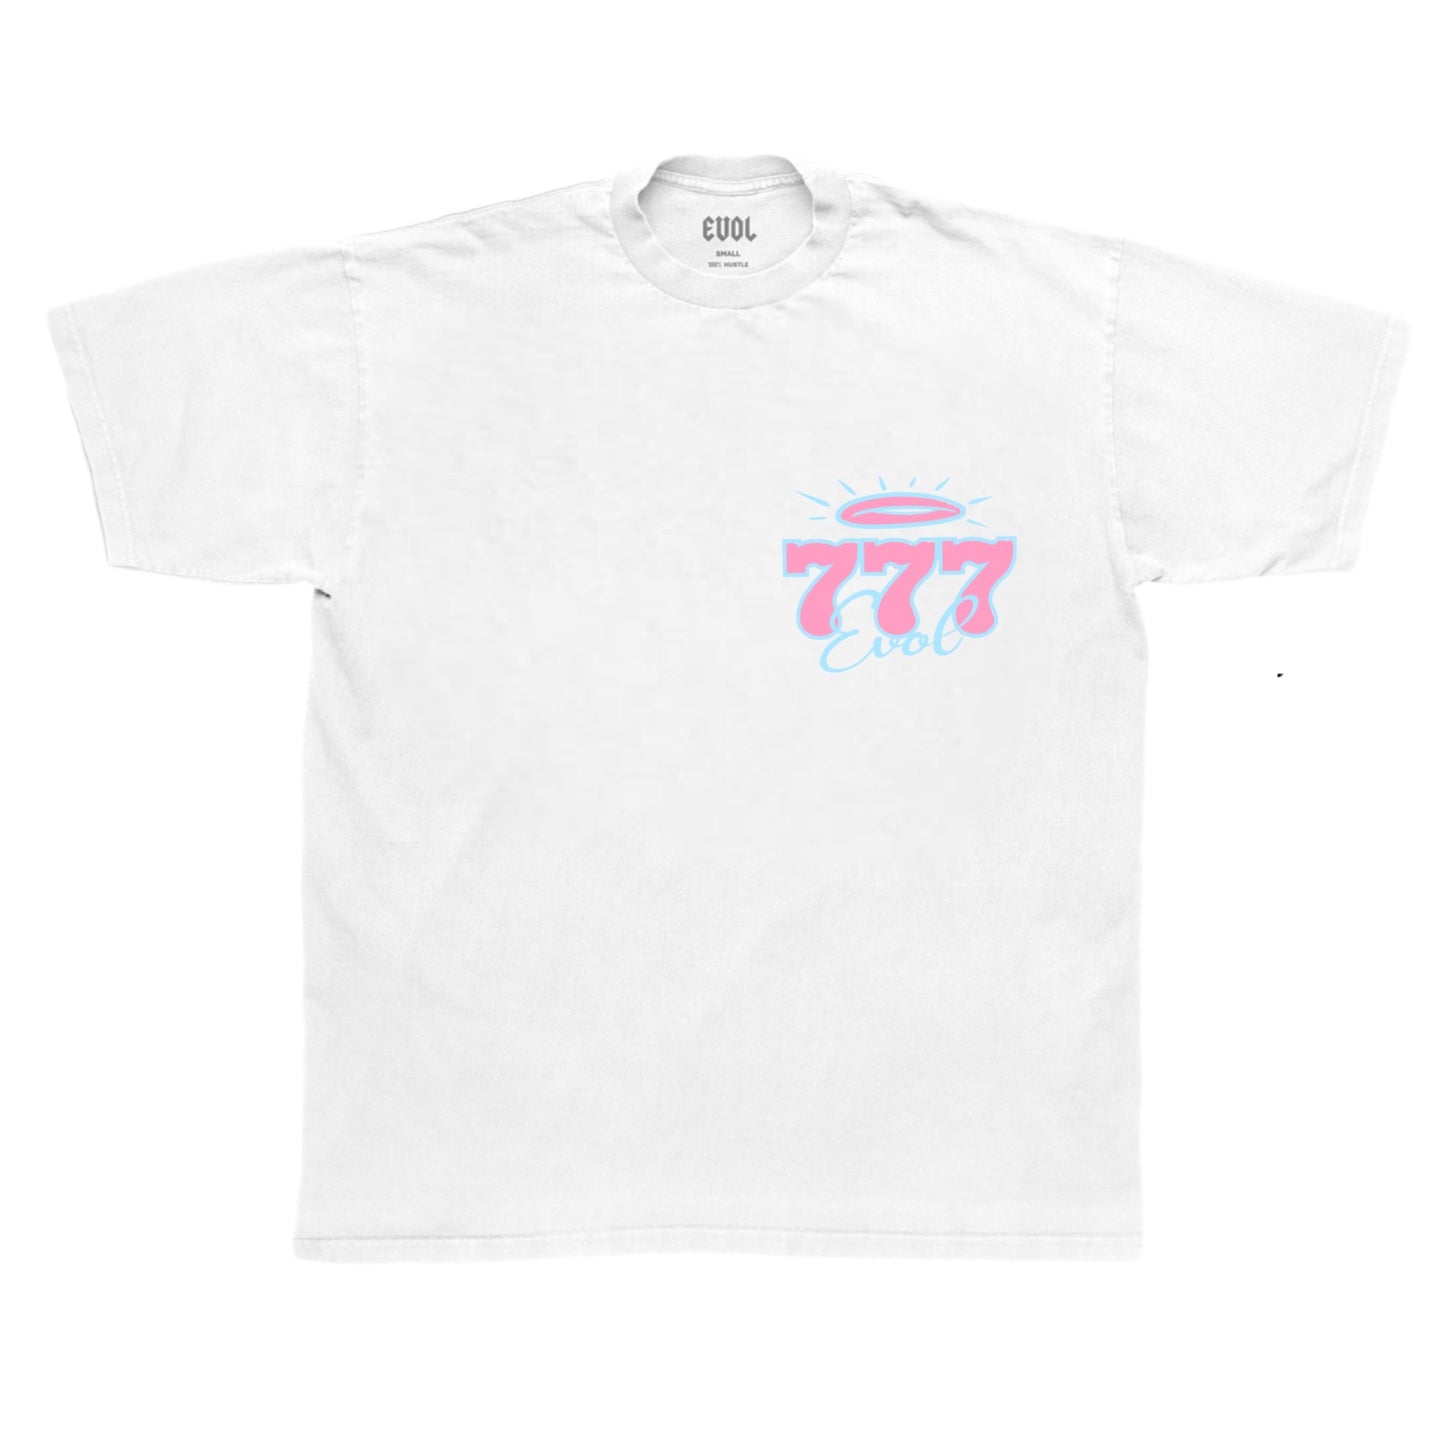 EVOL 777 Tee White Pink and Baby Blue